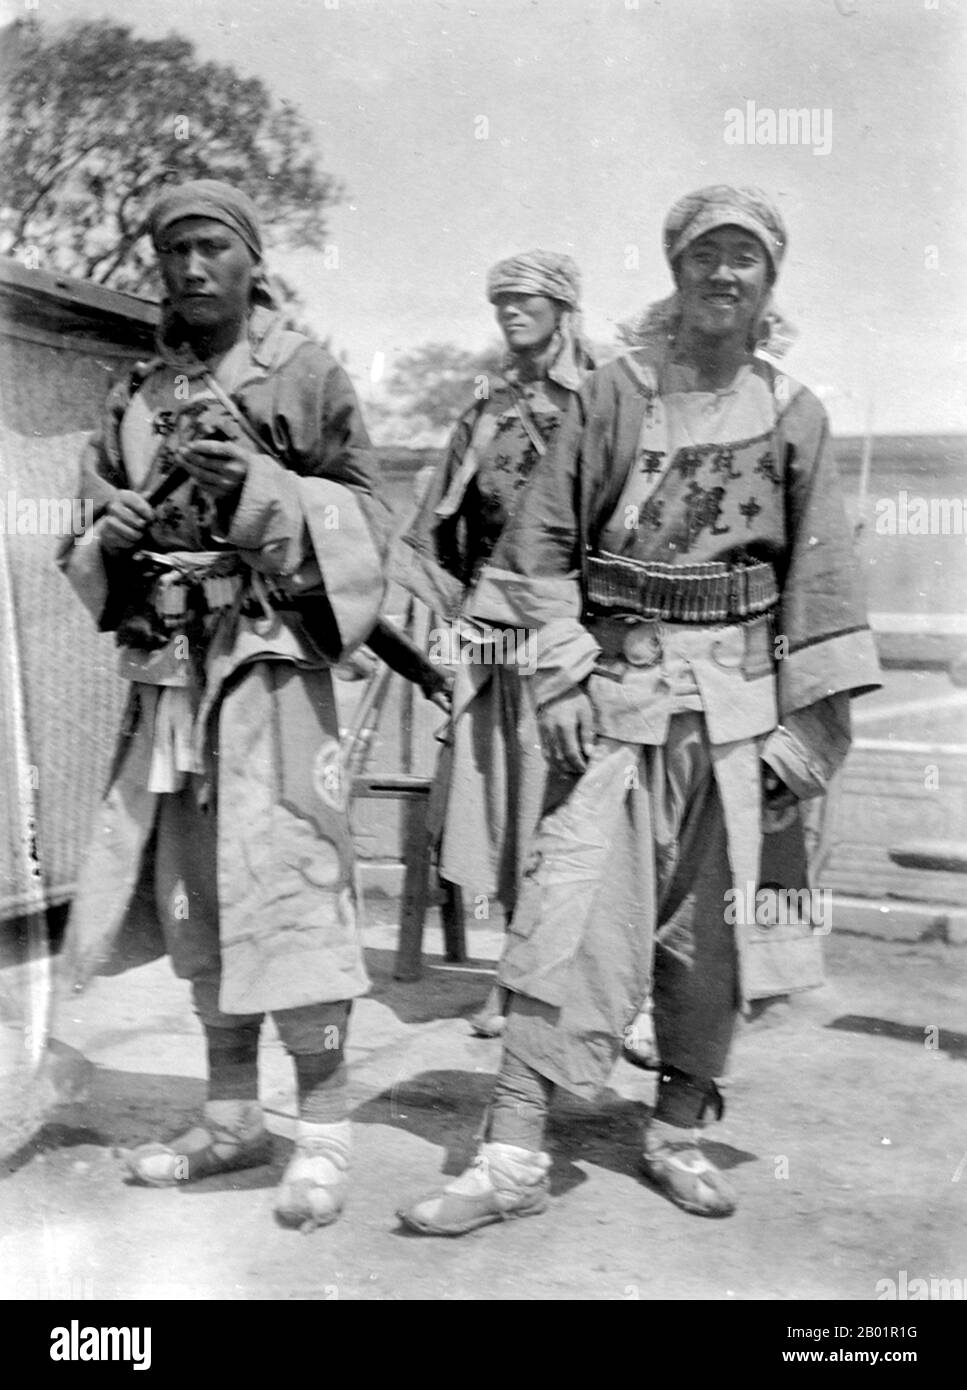 China: Chinese Muslim troops from Gansu serving under General Dong Fuxiang of the Qing Imperial Army; they were also known as the 'Kansu Braves', Beijing, 1900.  The Boxer Rebellion, also known as Boxer Uprising or Yihetuan Movement, was a proto-nationalist movement by the Righteous Harmony Society in China between 1898 and 1901, opposing foreign imperialism and Christianity.  The uprising took place in response to foreign spheres of influence in China, with grievances ranging from opium traders, political invasion, economic manipulation, to missionary evangelism. Stock Photo